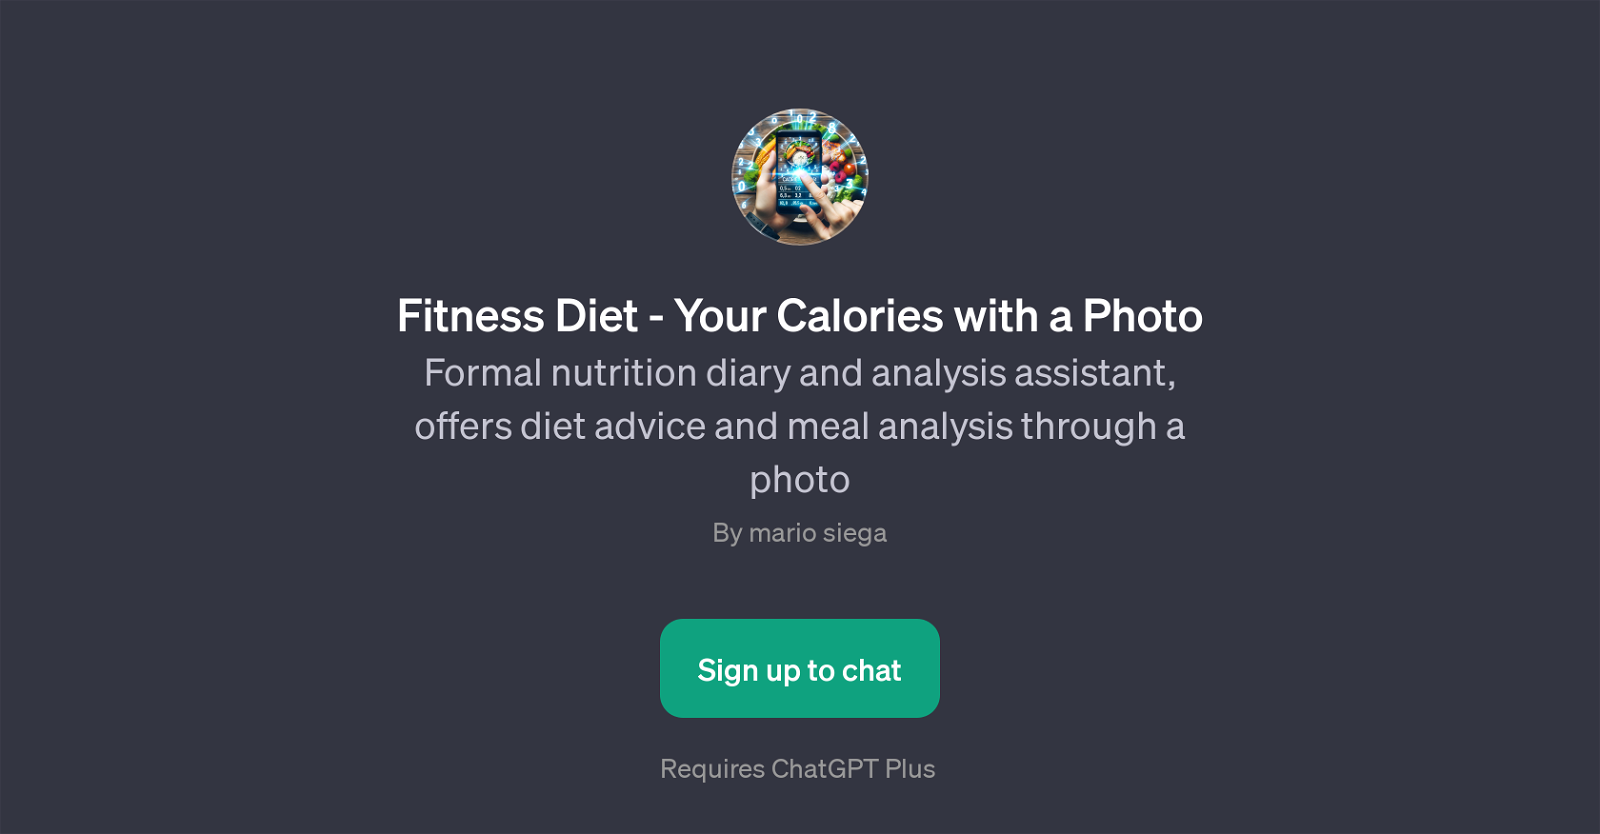 Fitness Diet - Your Calories with a Photo website